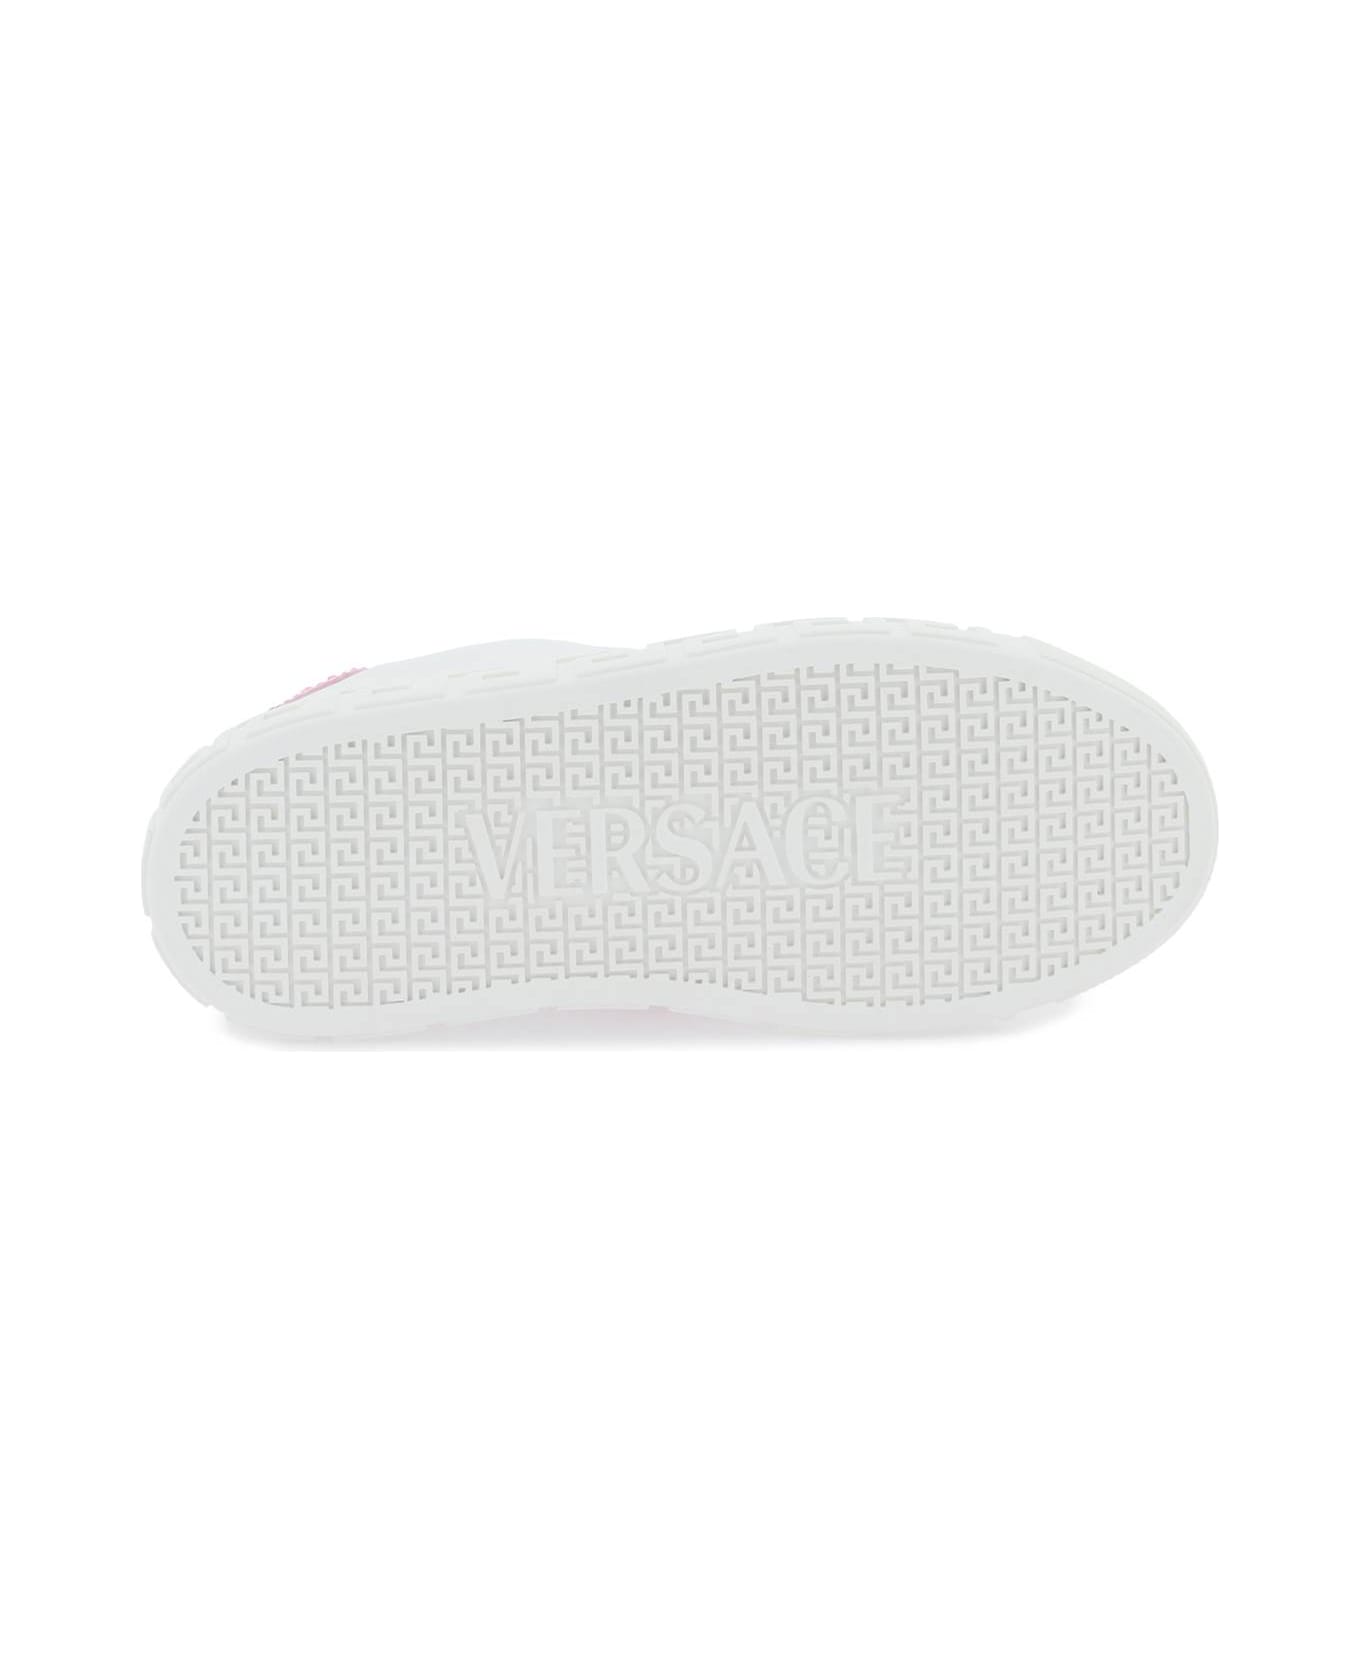 Versace Crystal Greca Sneakers - WHITE PALE PINK (White)